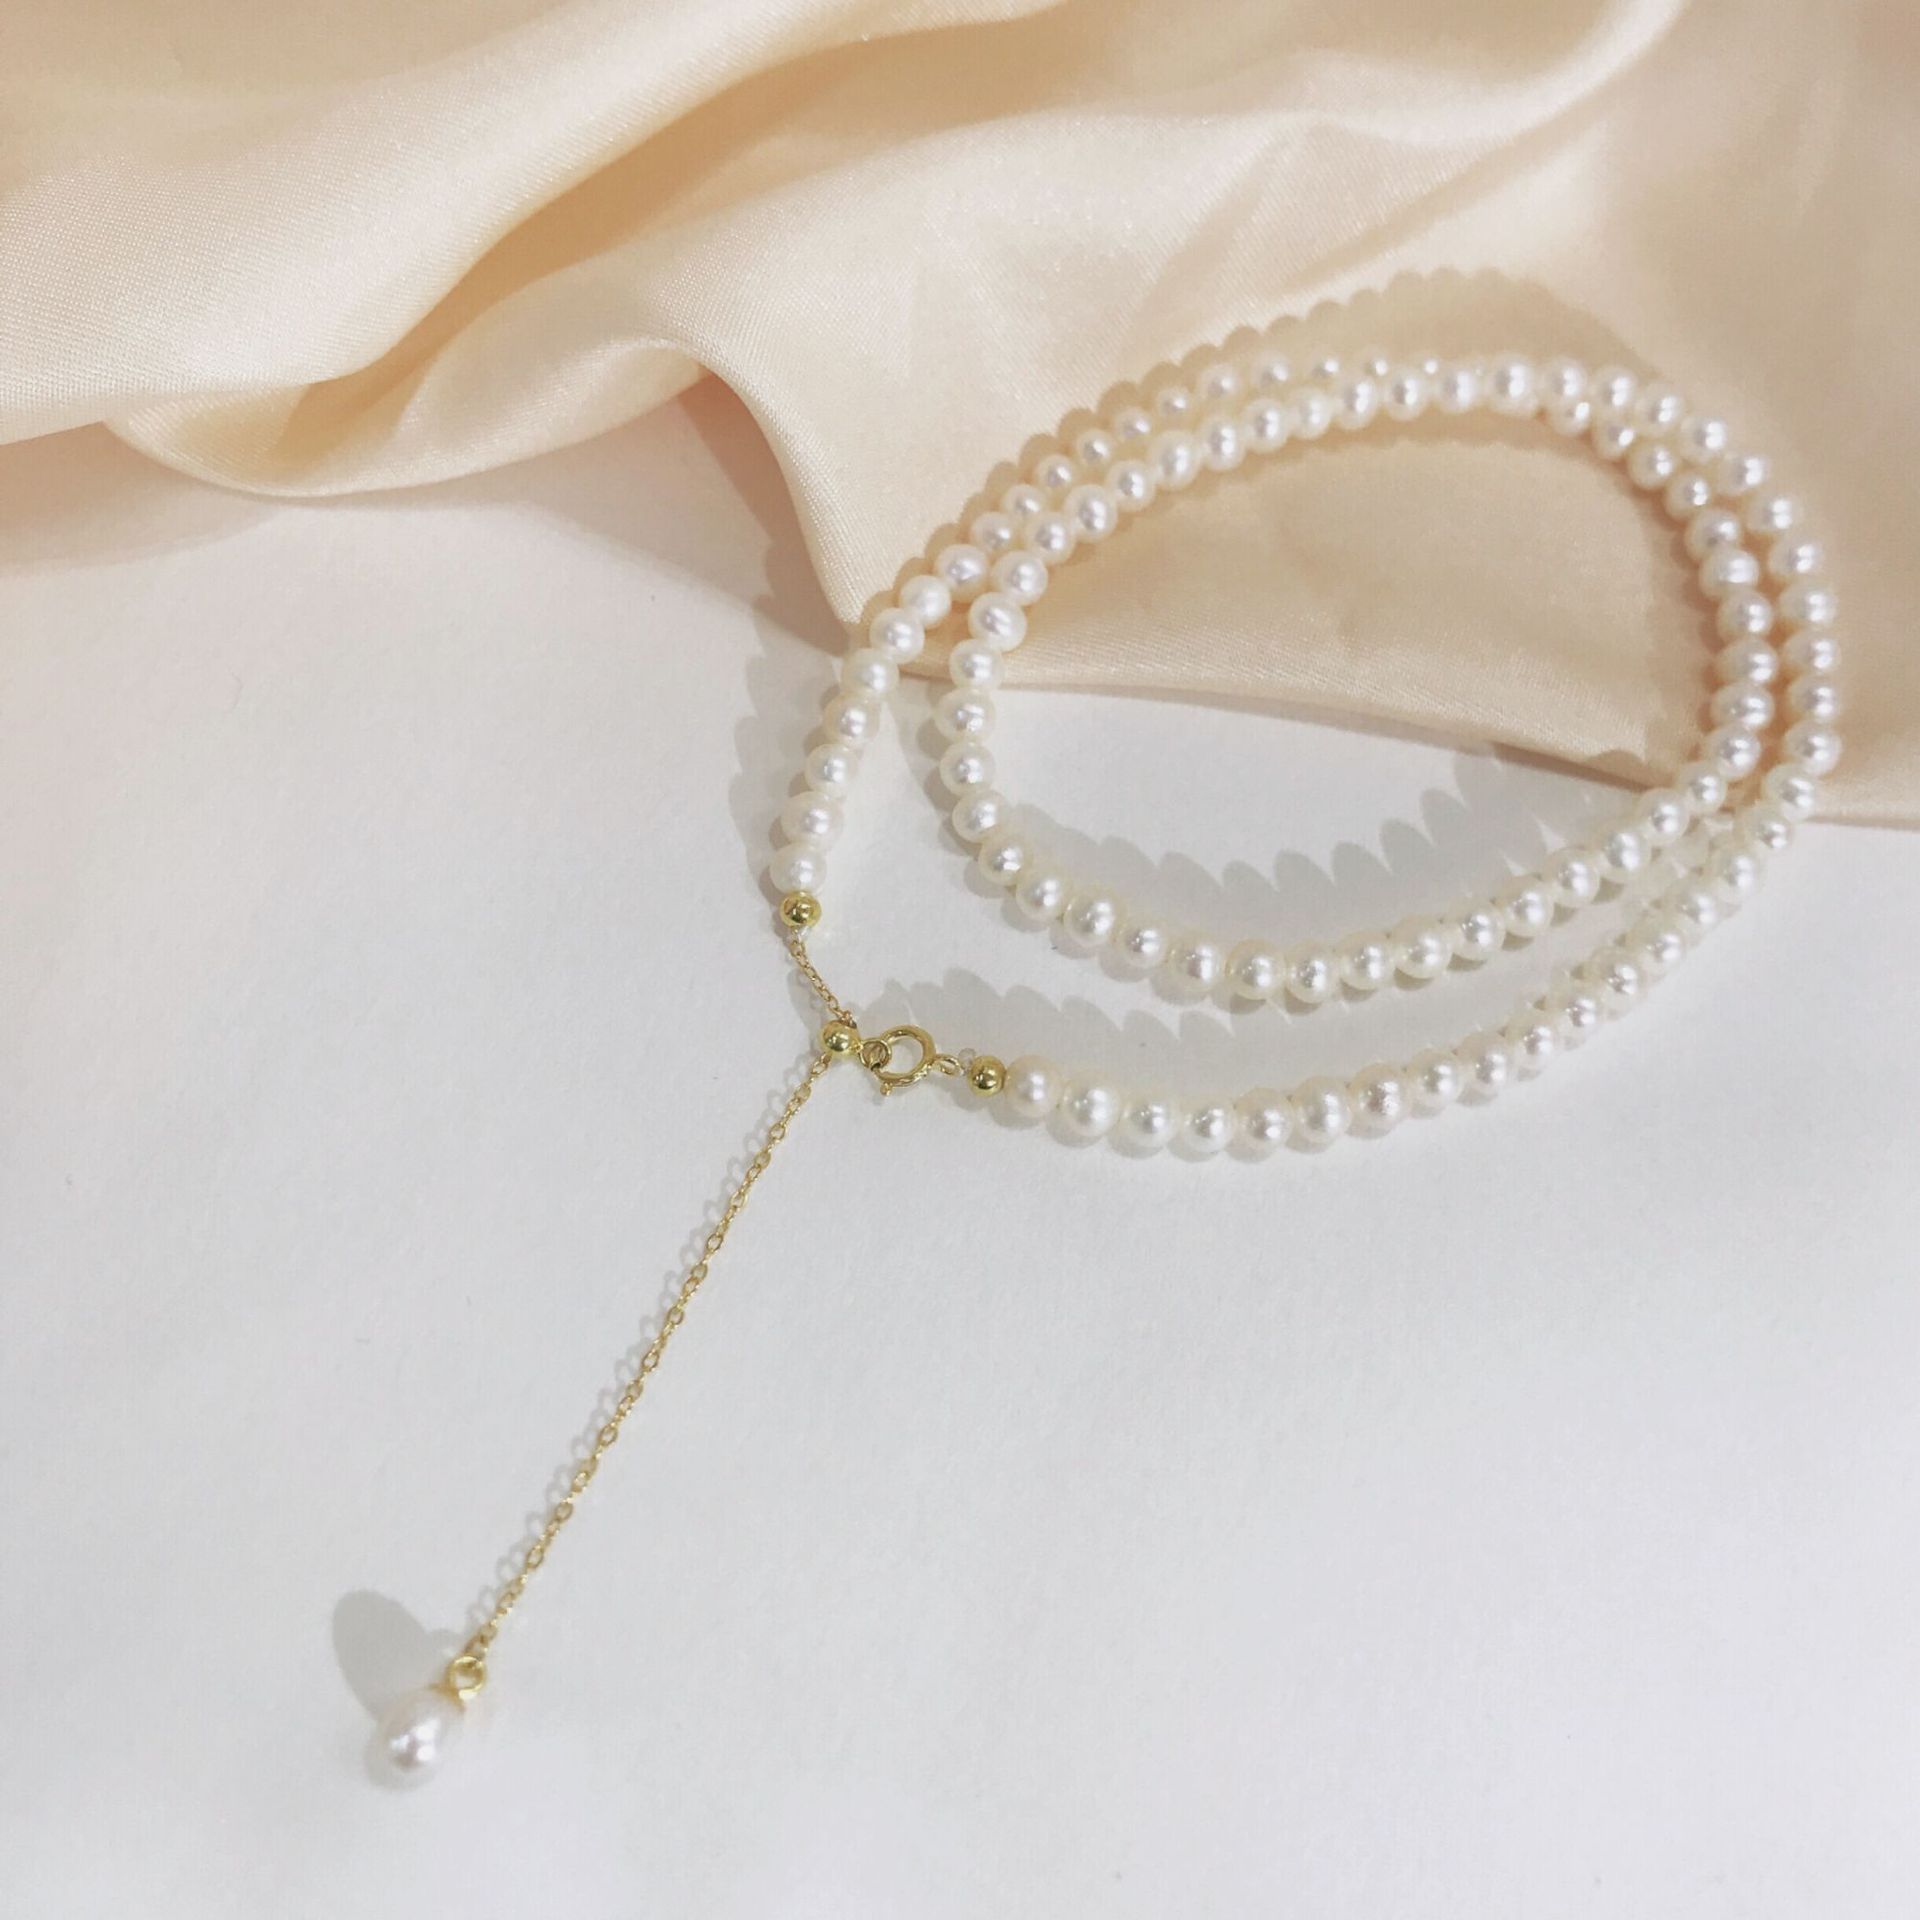 Ornament Natural Freshwater Pearl Necklace S925 Silver Embeded Jade Pith Buddha All-Match Suit Mother's Day Gift